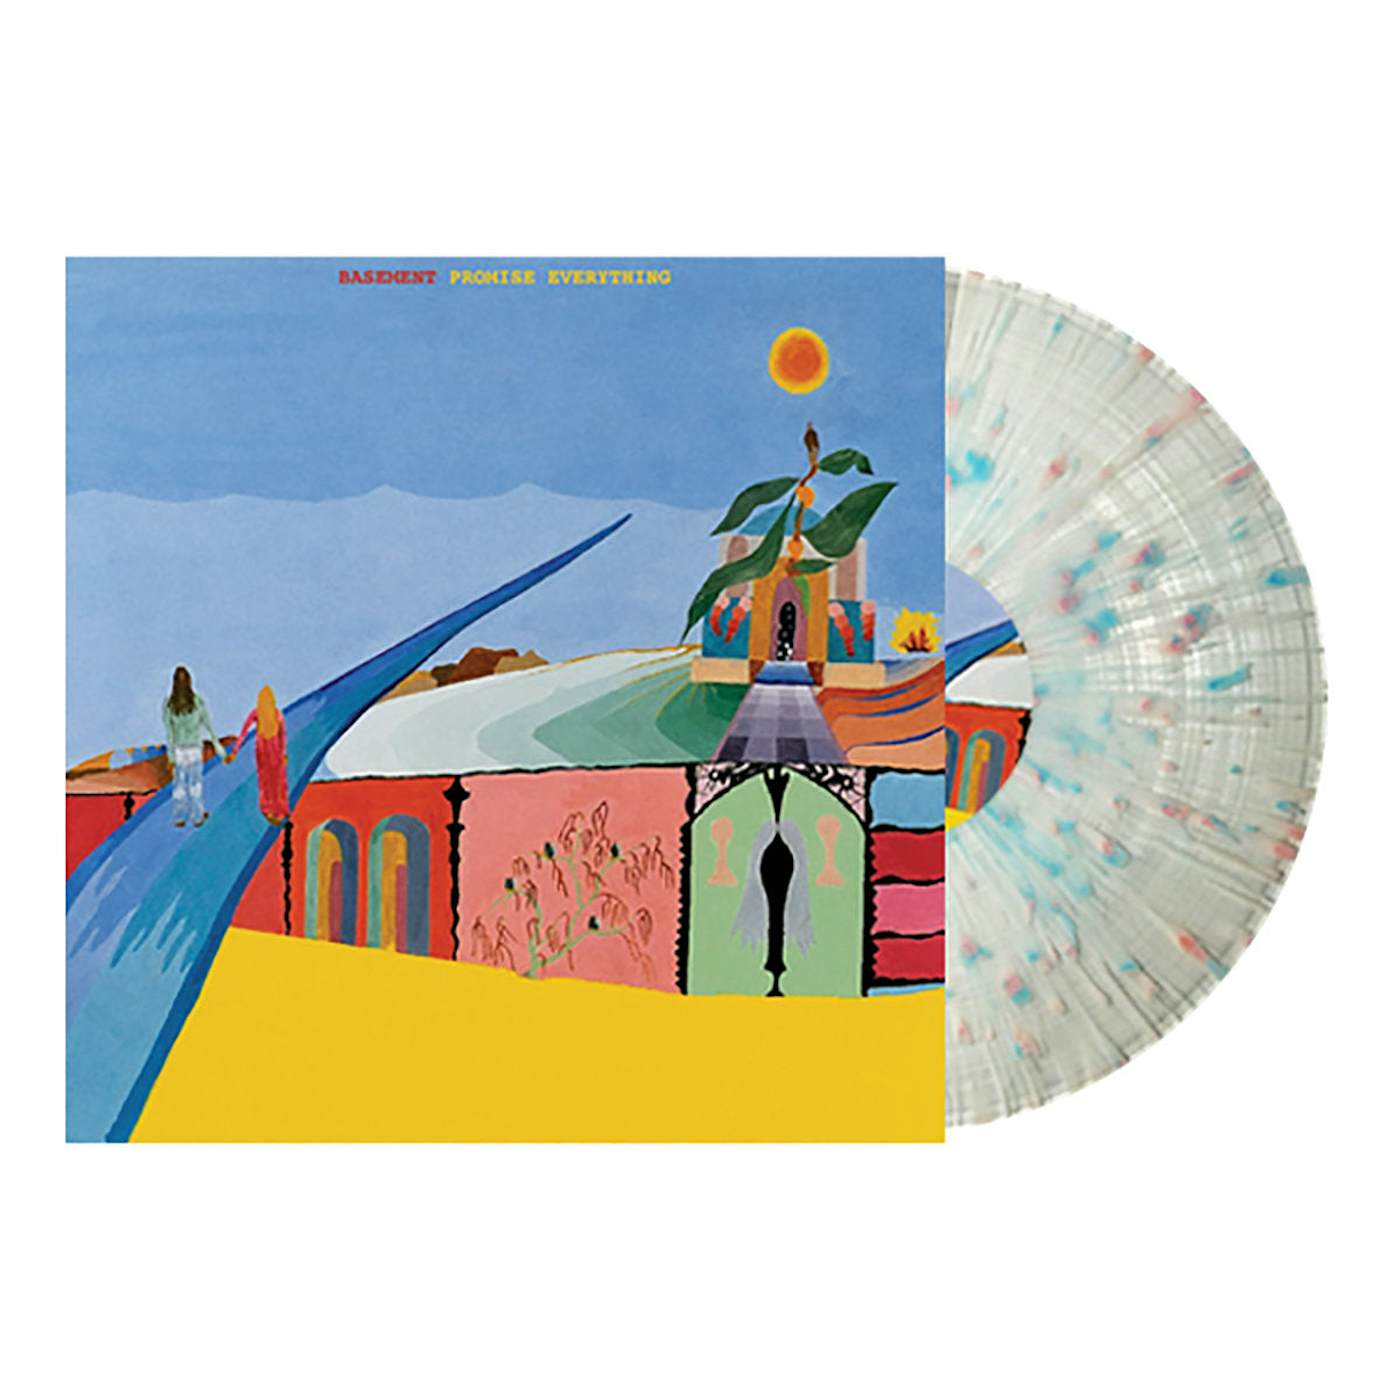 Basement Promise Everything 12" Vinyl (Clear with Blue/Pink Splatter)